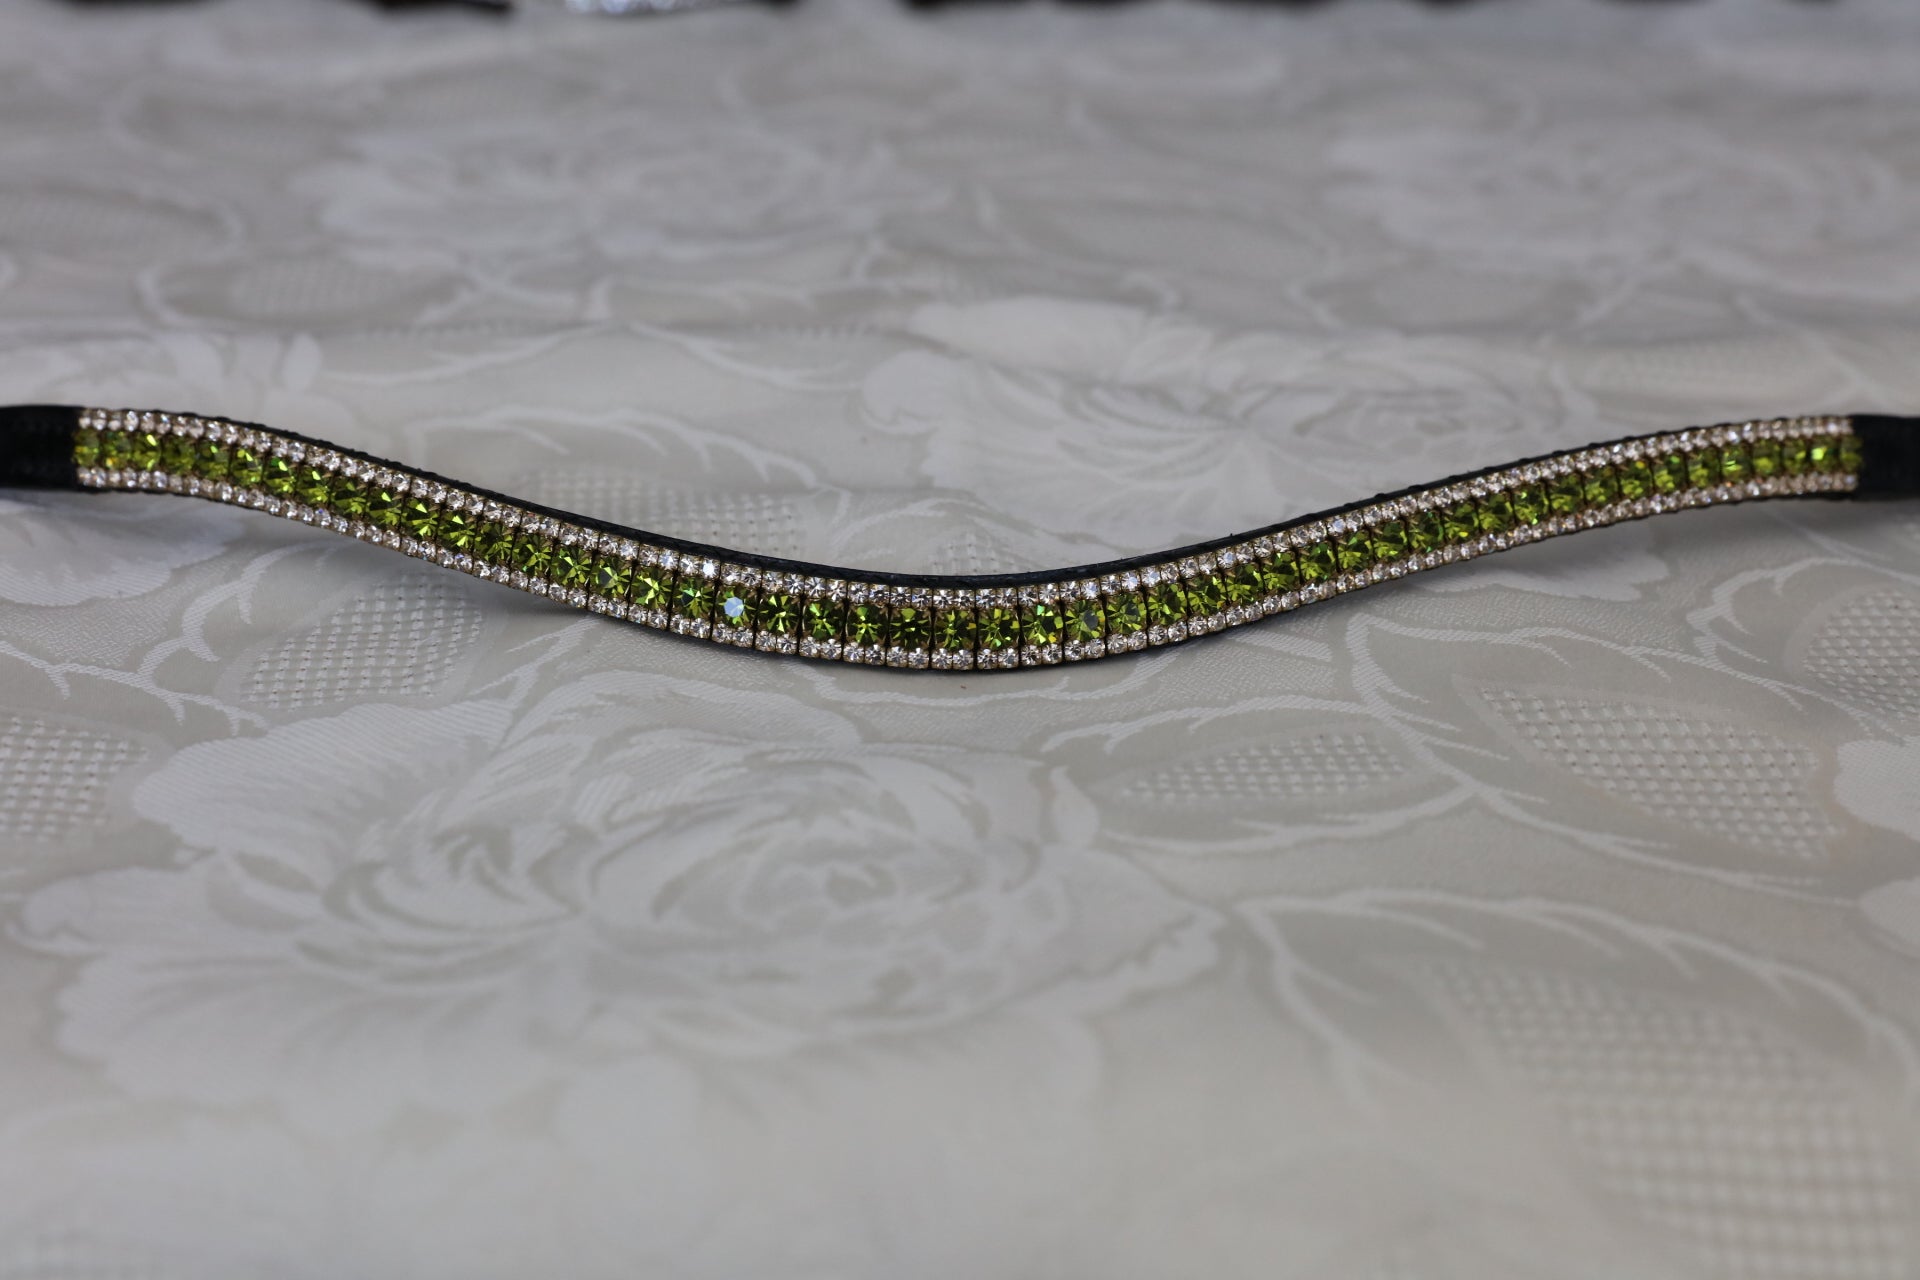 Equiture Olivine and honey browband